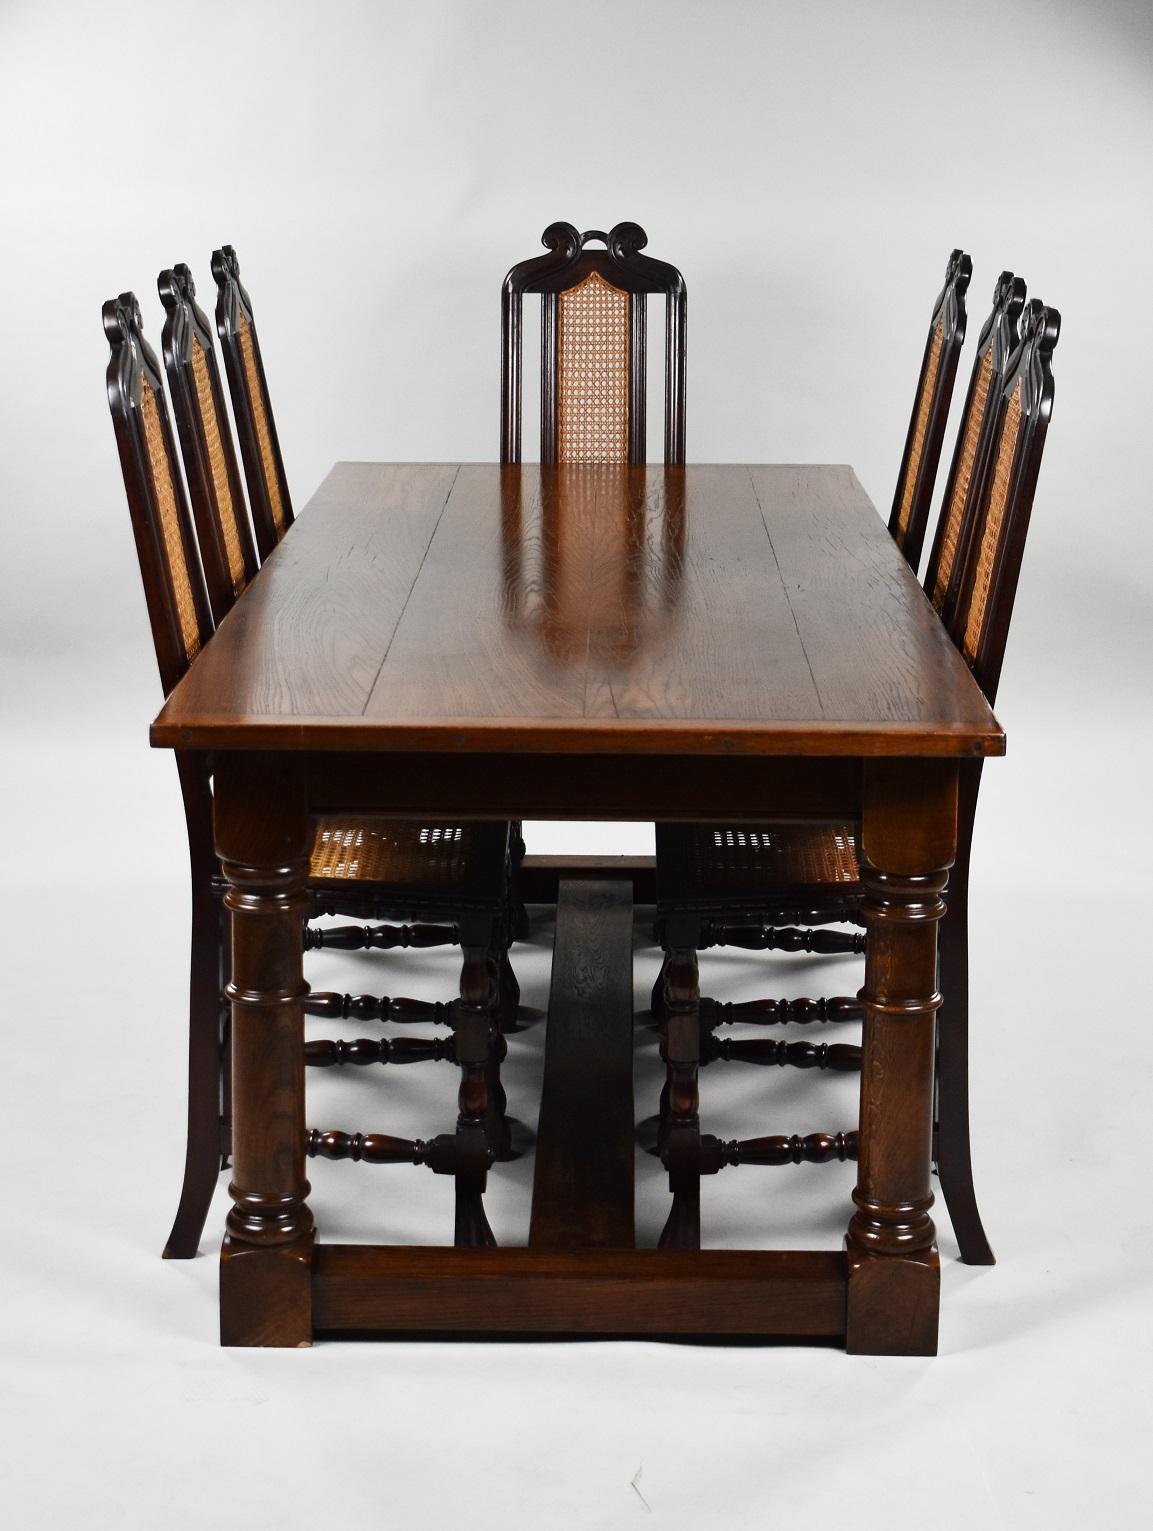 1930s Oak refectory table and eight single chairs in good condition. The chairs have cane weaved seats and backs with decorative top and spiral supports to each shaped leg.